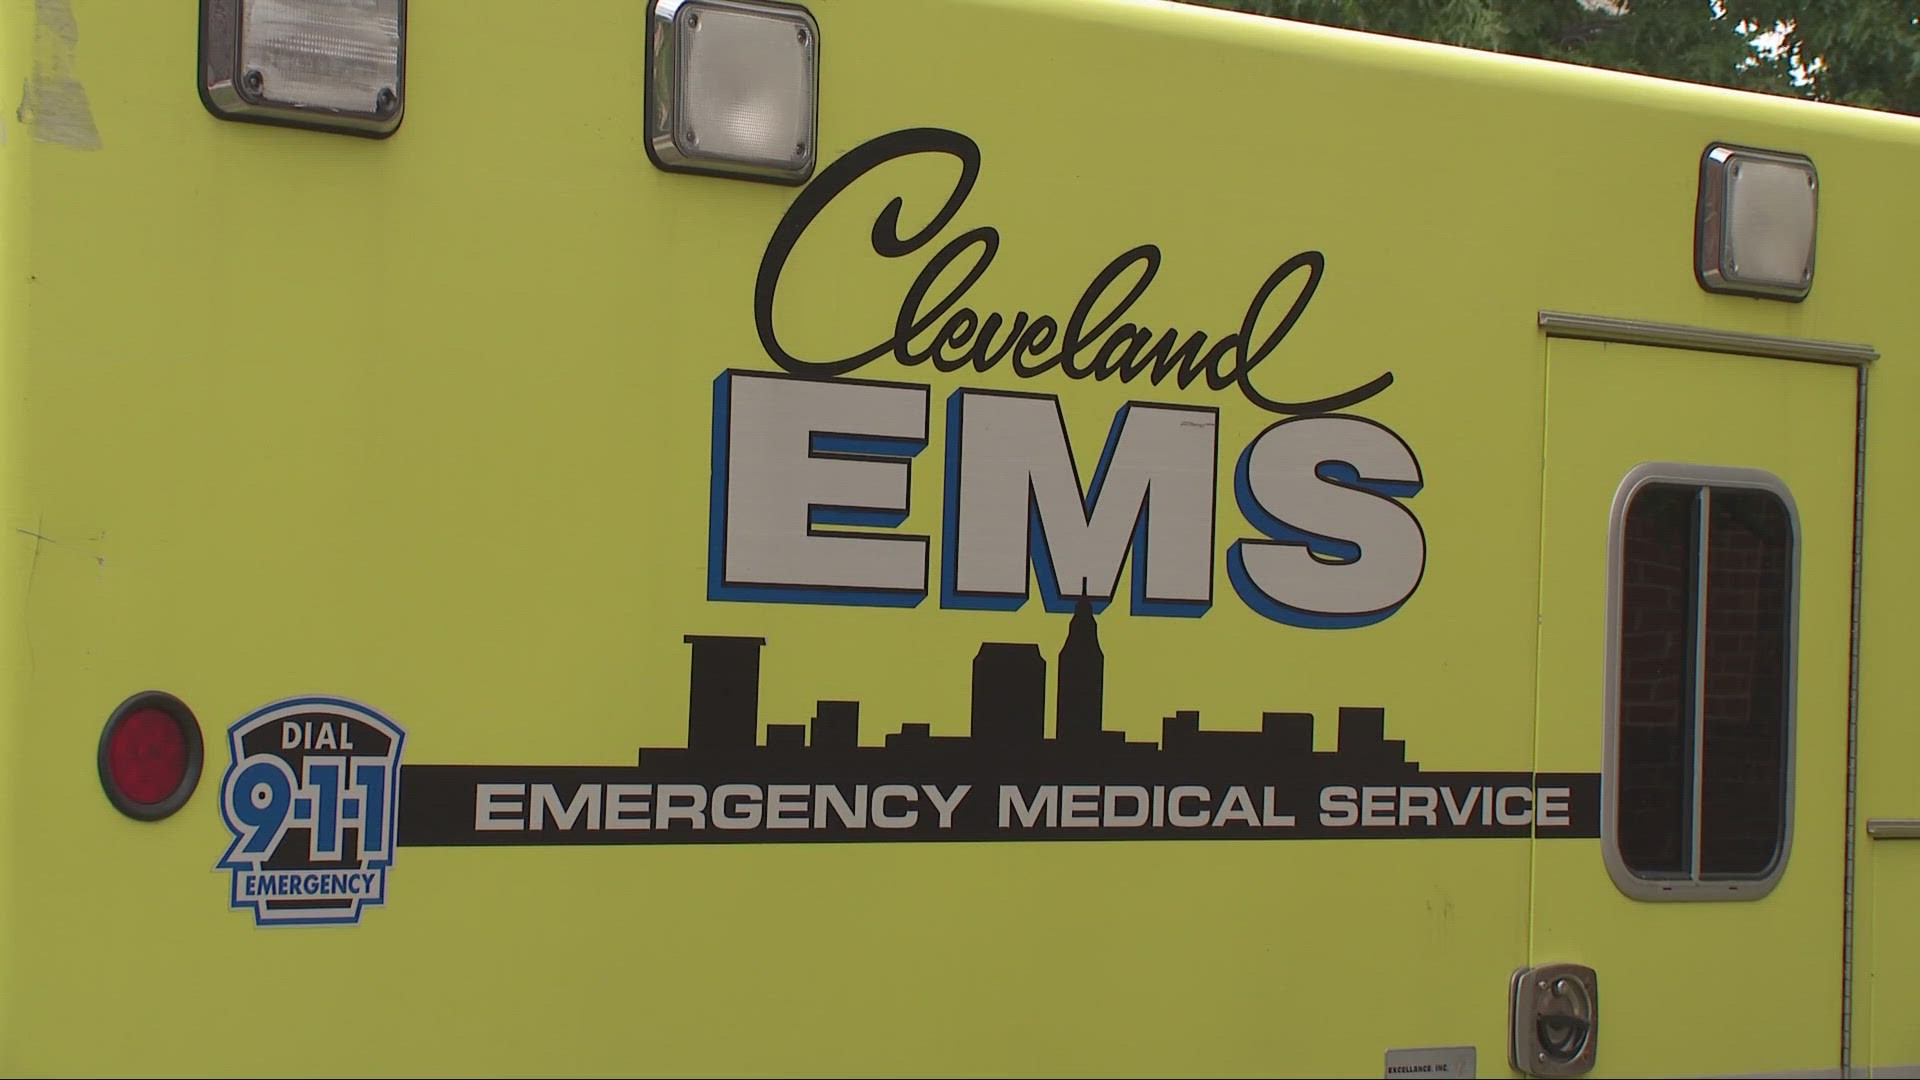 Hourly pay is listed at $32.24 after five years of service. Cleveland EMS currently has 28 positions open for EMS providers.